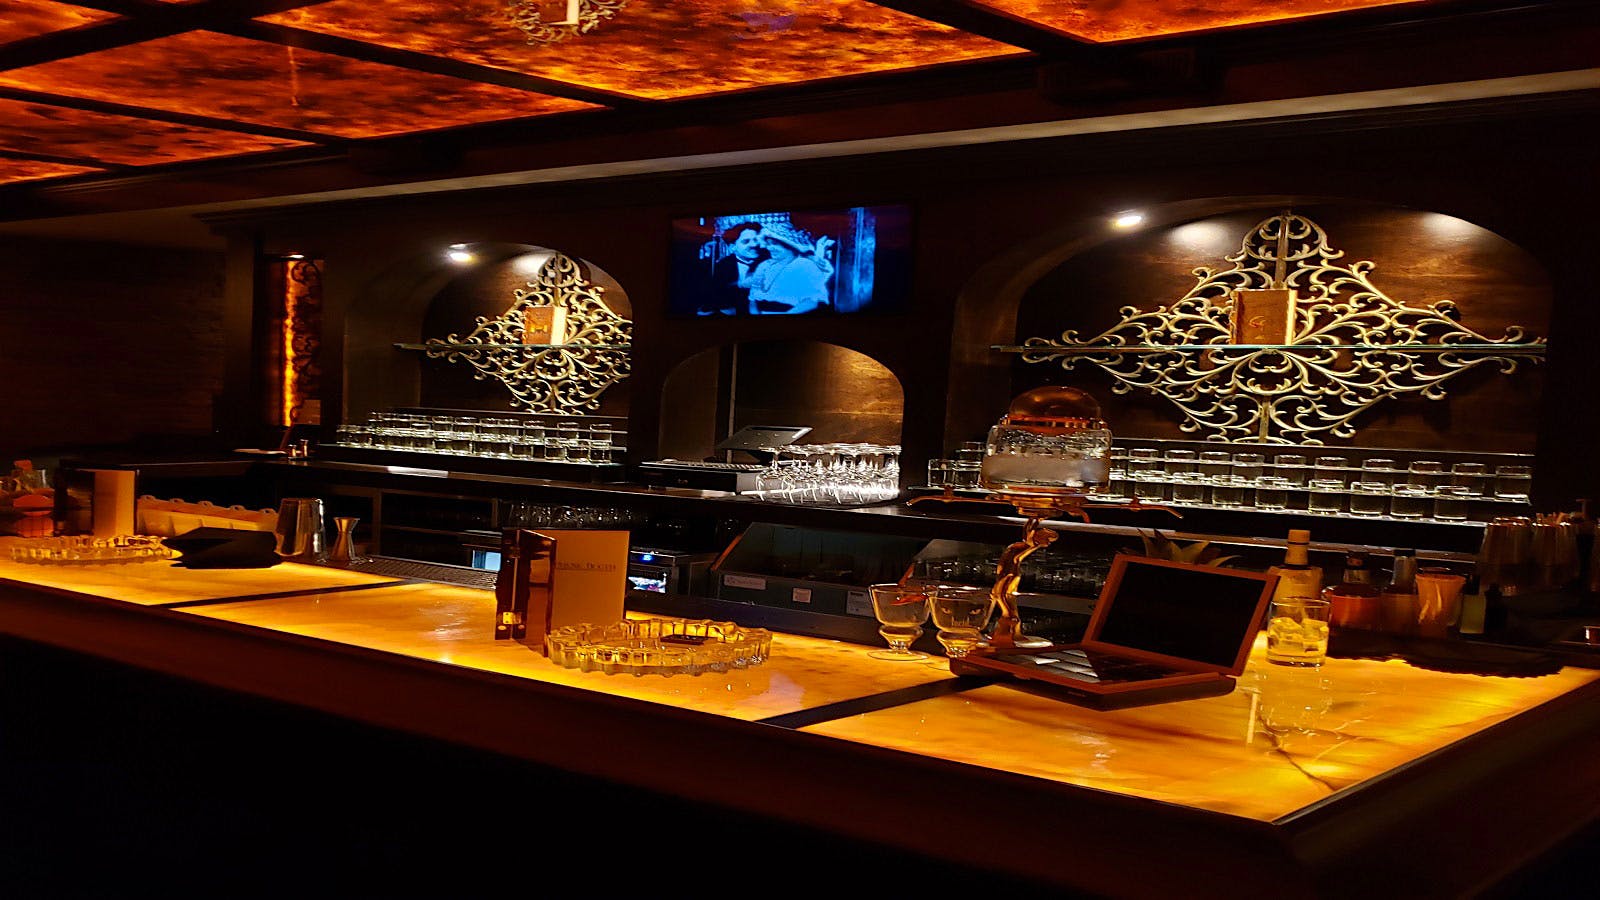 The honey-onyx bar is the focal point of the room, where drink mixing is raised to an art form.